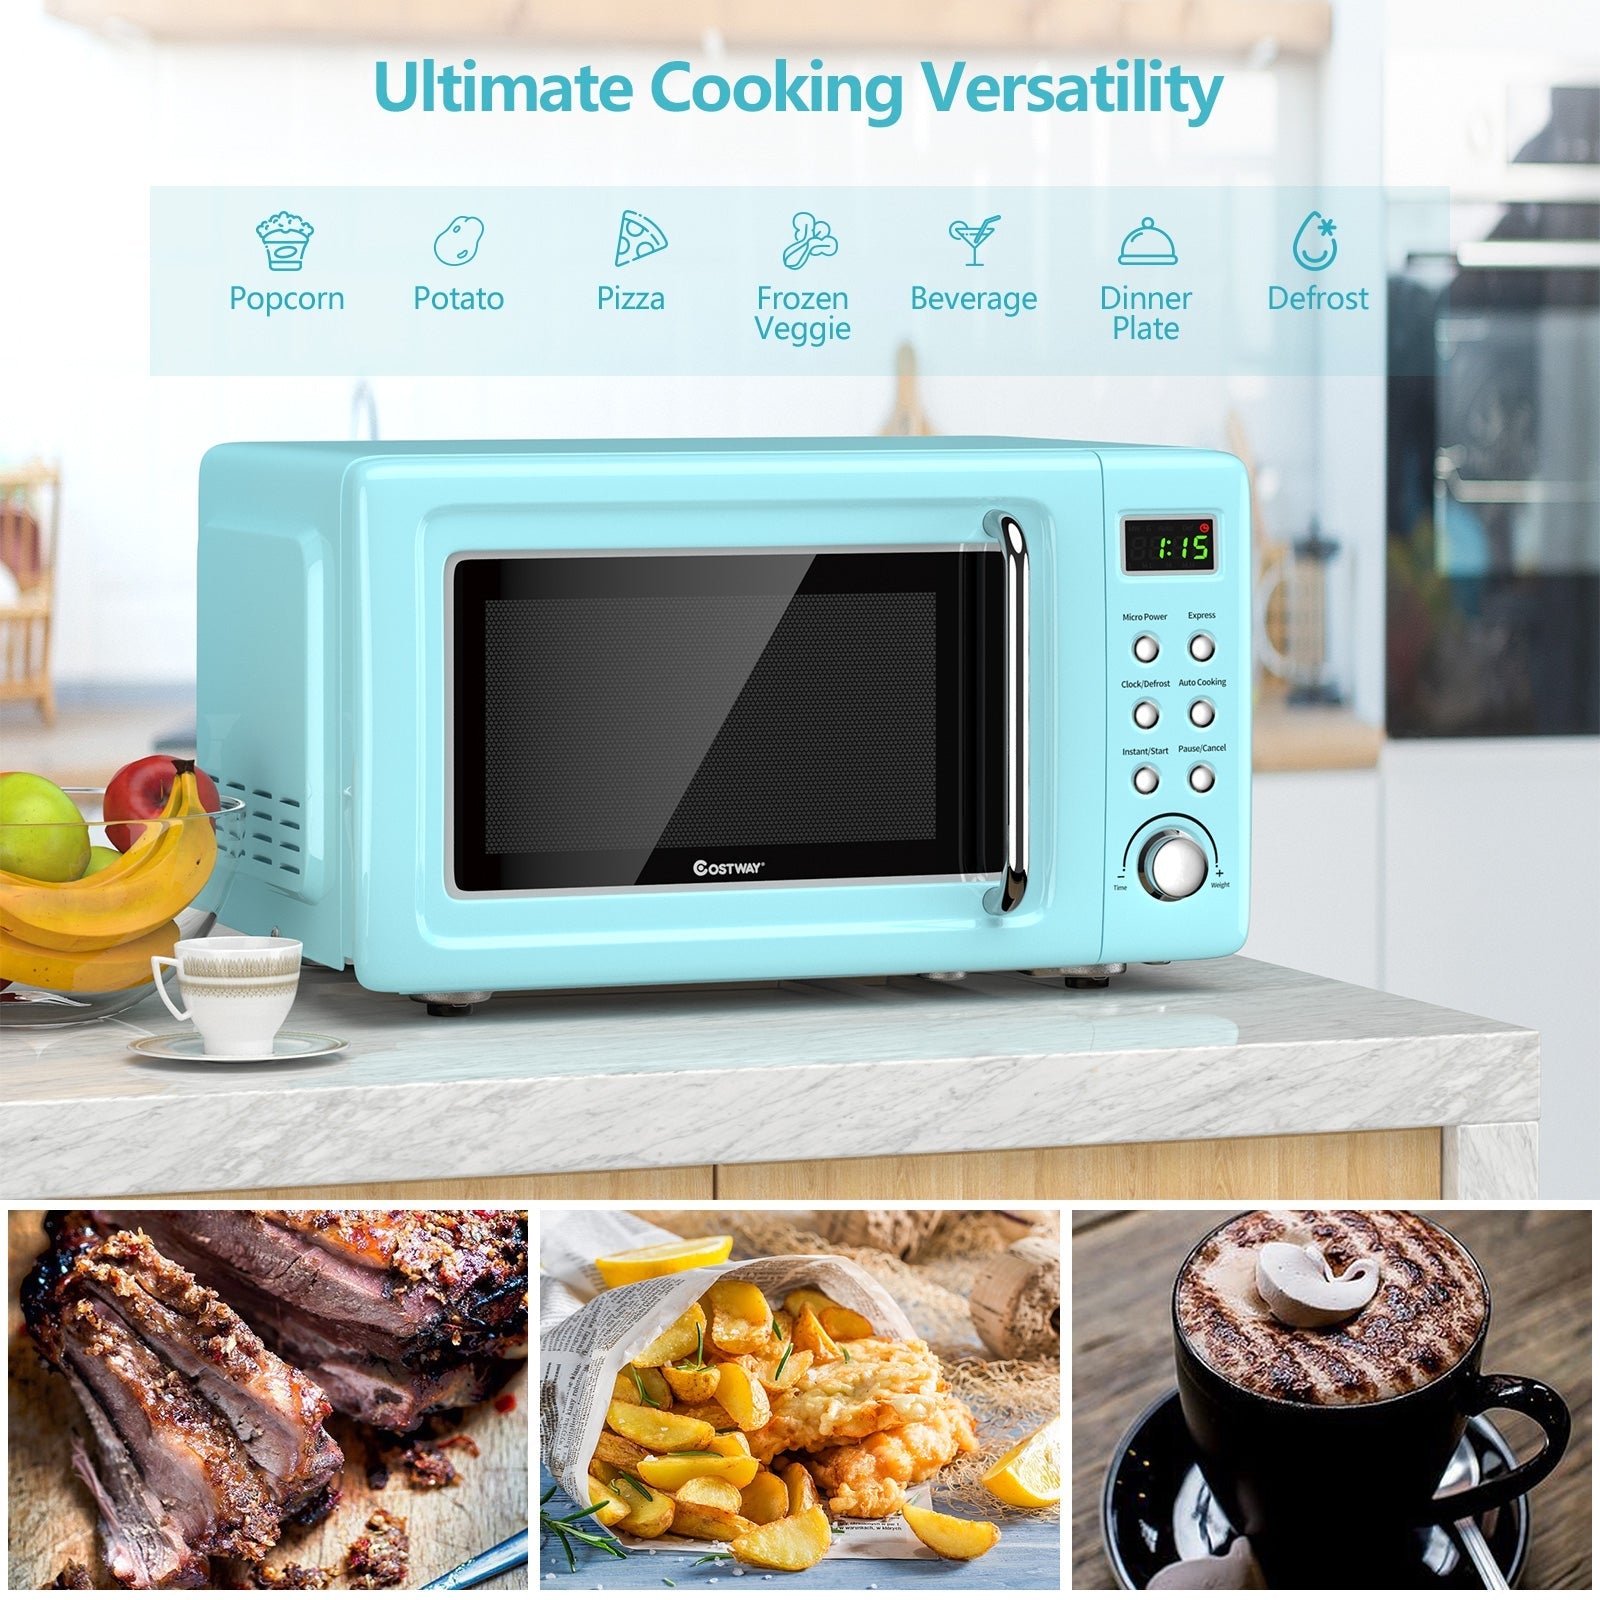 700W Retro Countertop Microwave Oven with 5 Micro Power and Auto Cooking Function at Gallery Canada